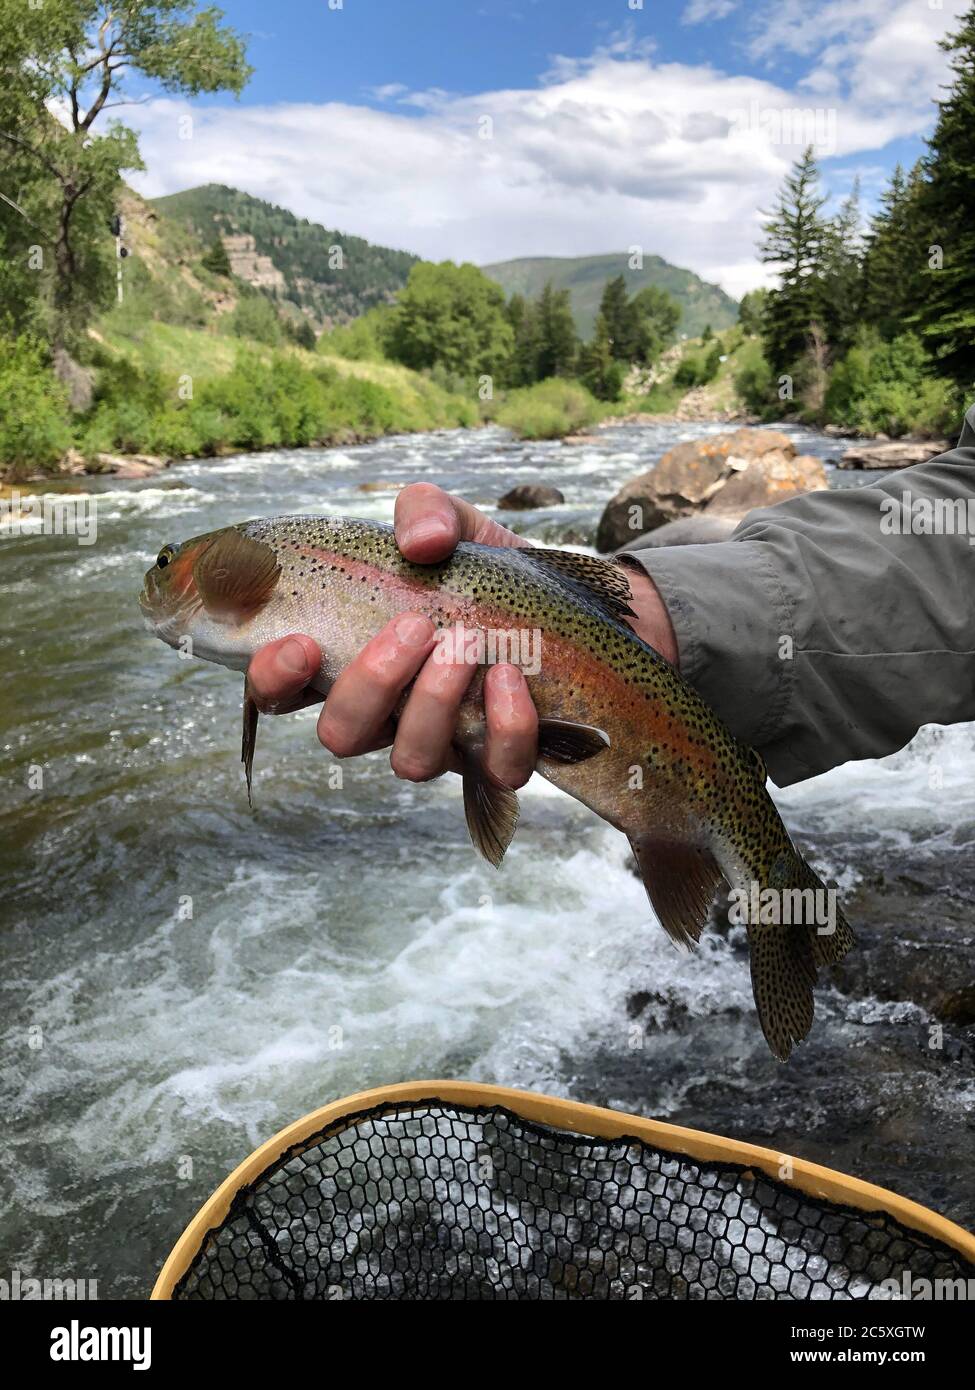 A man holds a rainbow trout over a flowing river with trees, mountains and blue skies in the background. He has caught the fish while fishing. Stock Photo